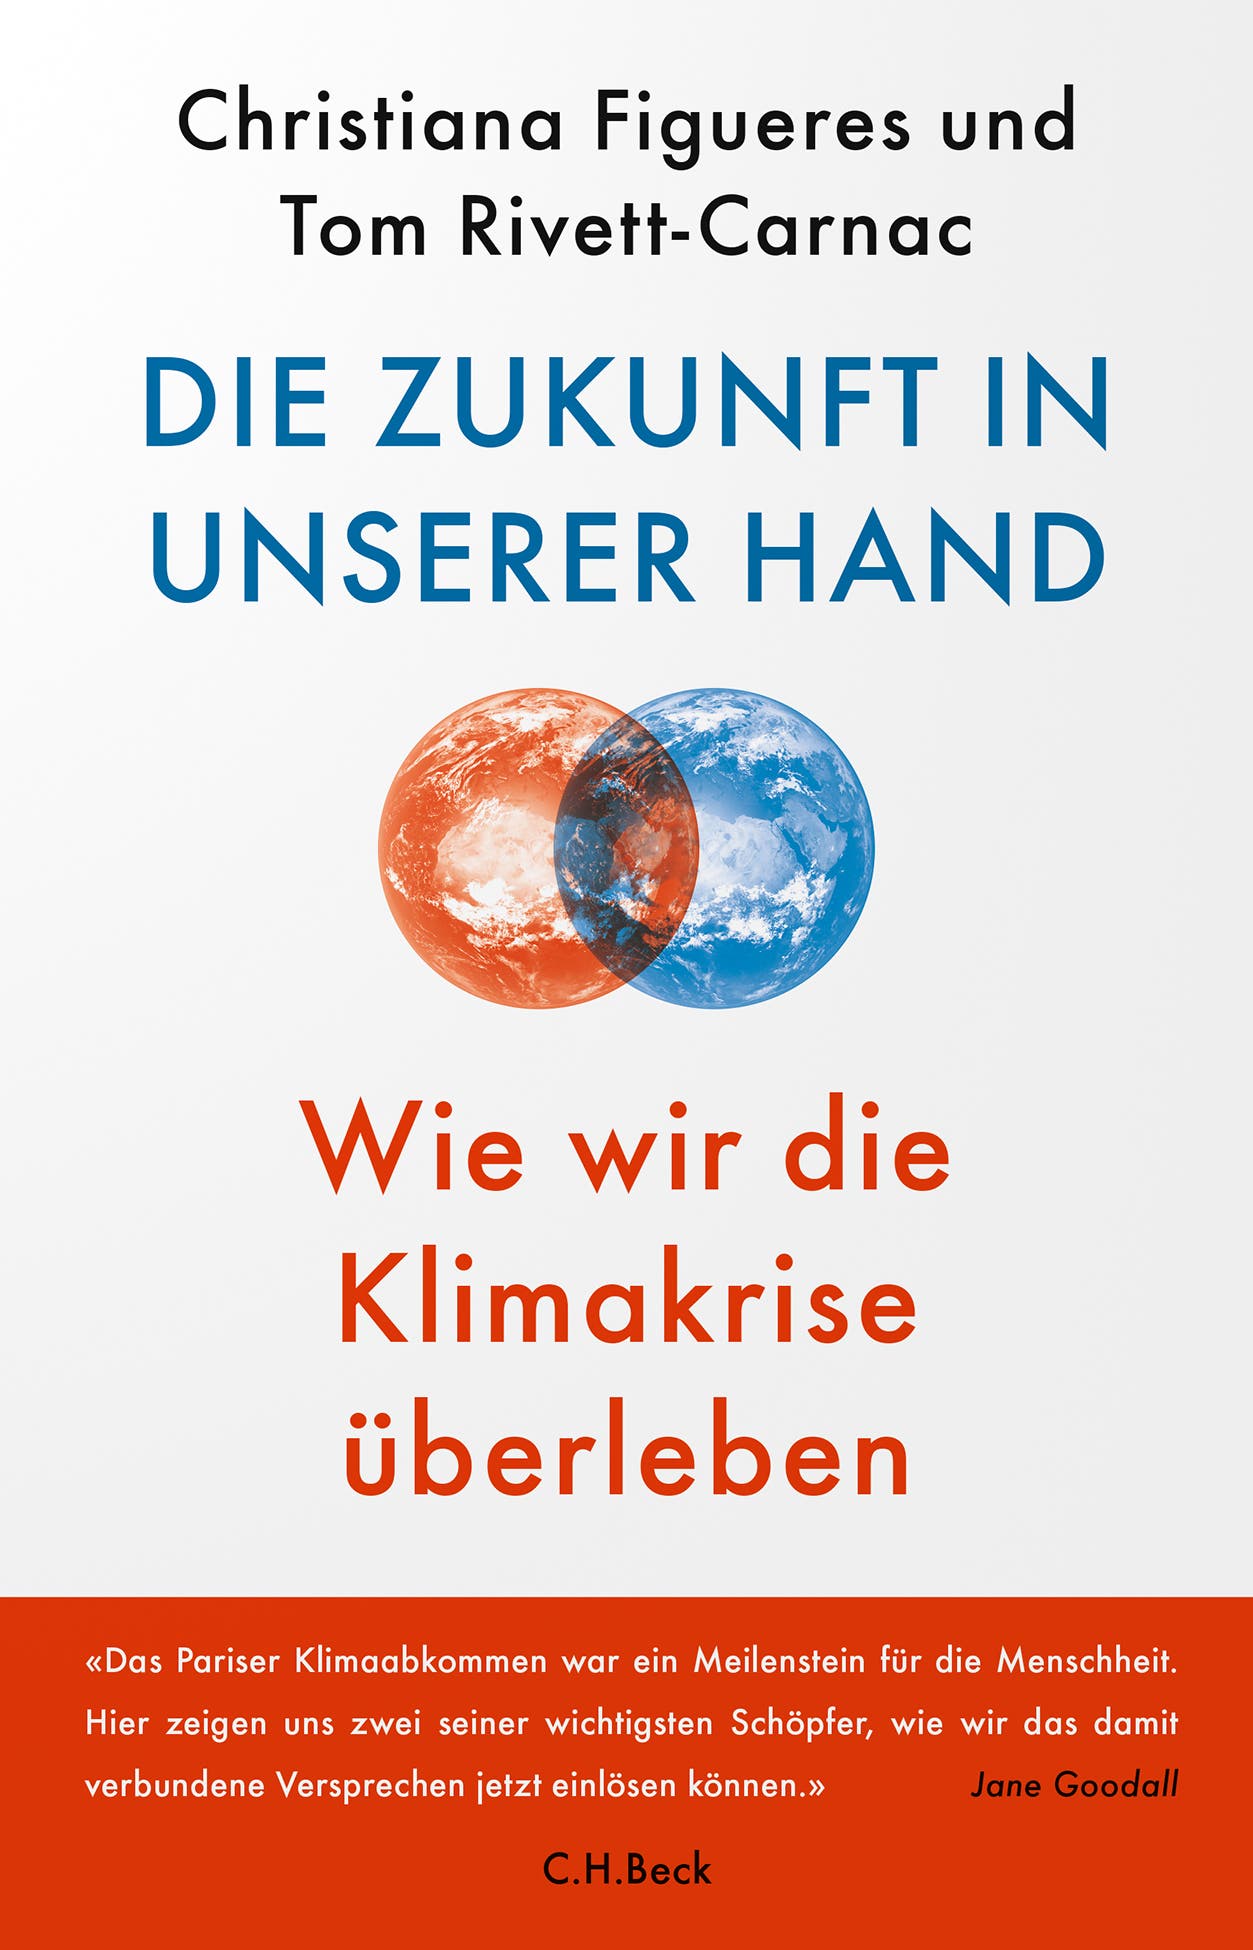 Review of the book “The future is in our hands”